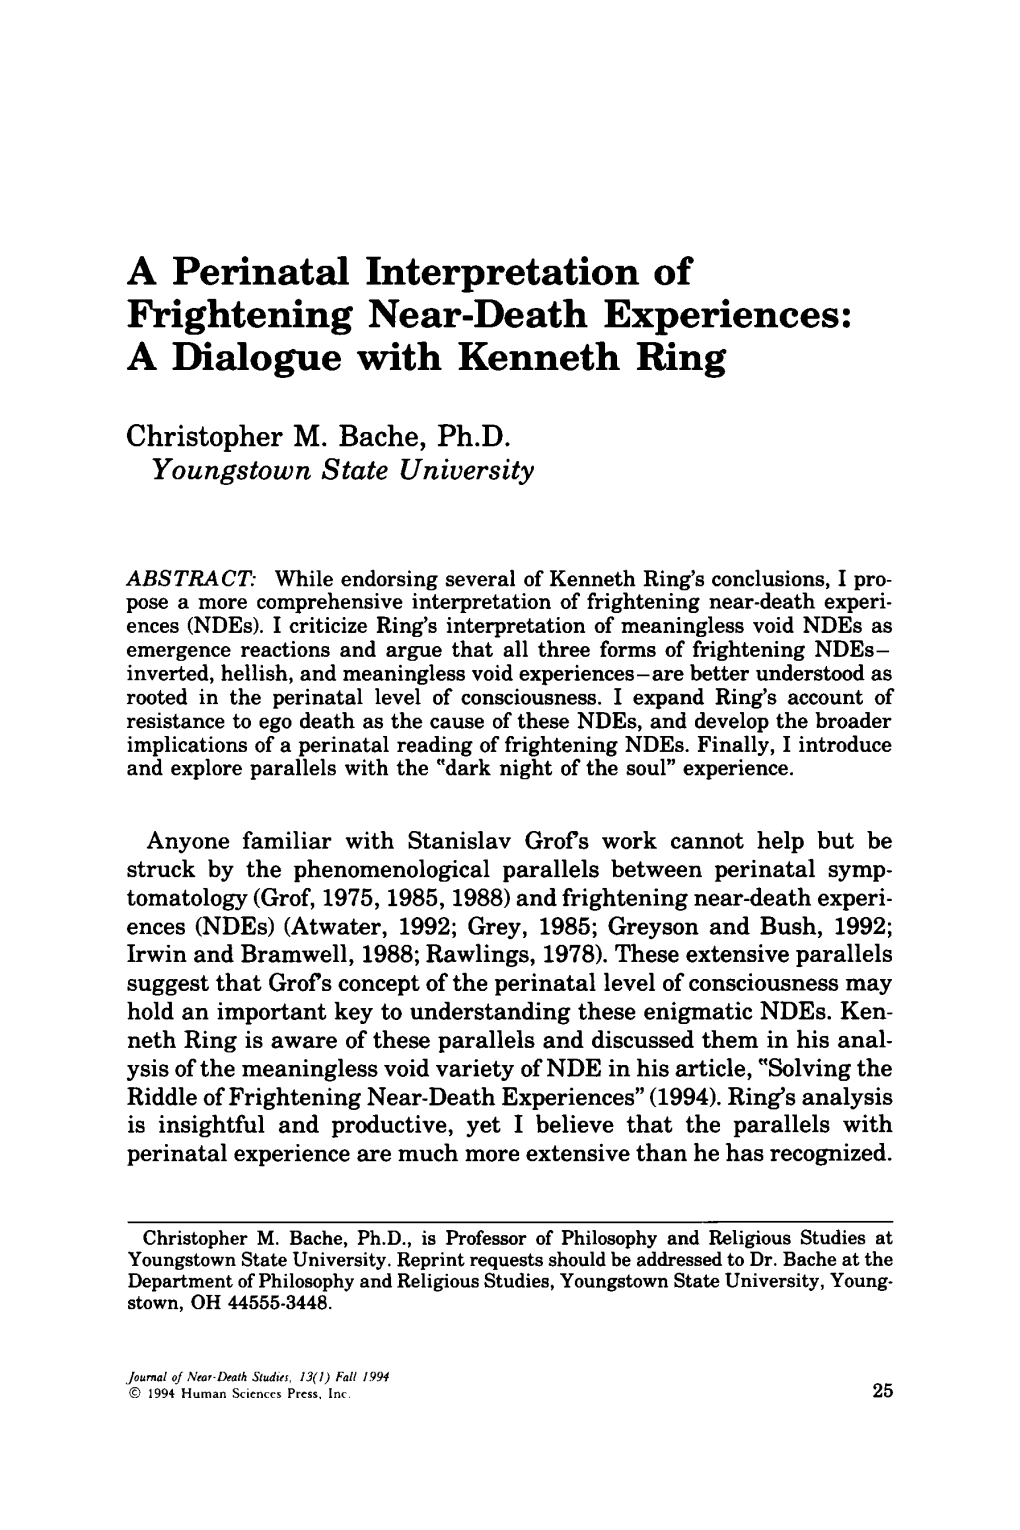 A Perinatal Interpretation of Frightening Near-Death Experiences: a Dialogue with Kenneth Ring